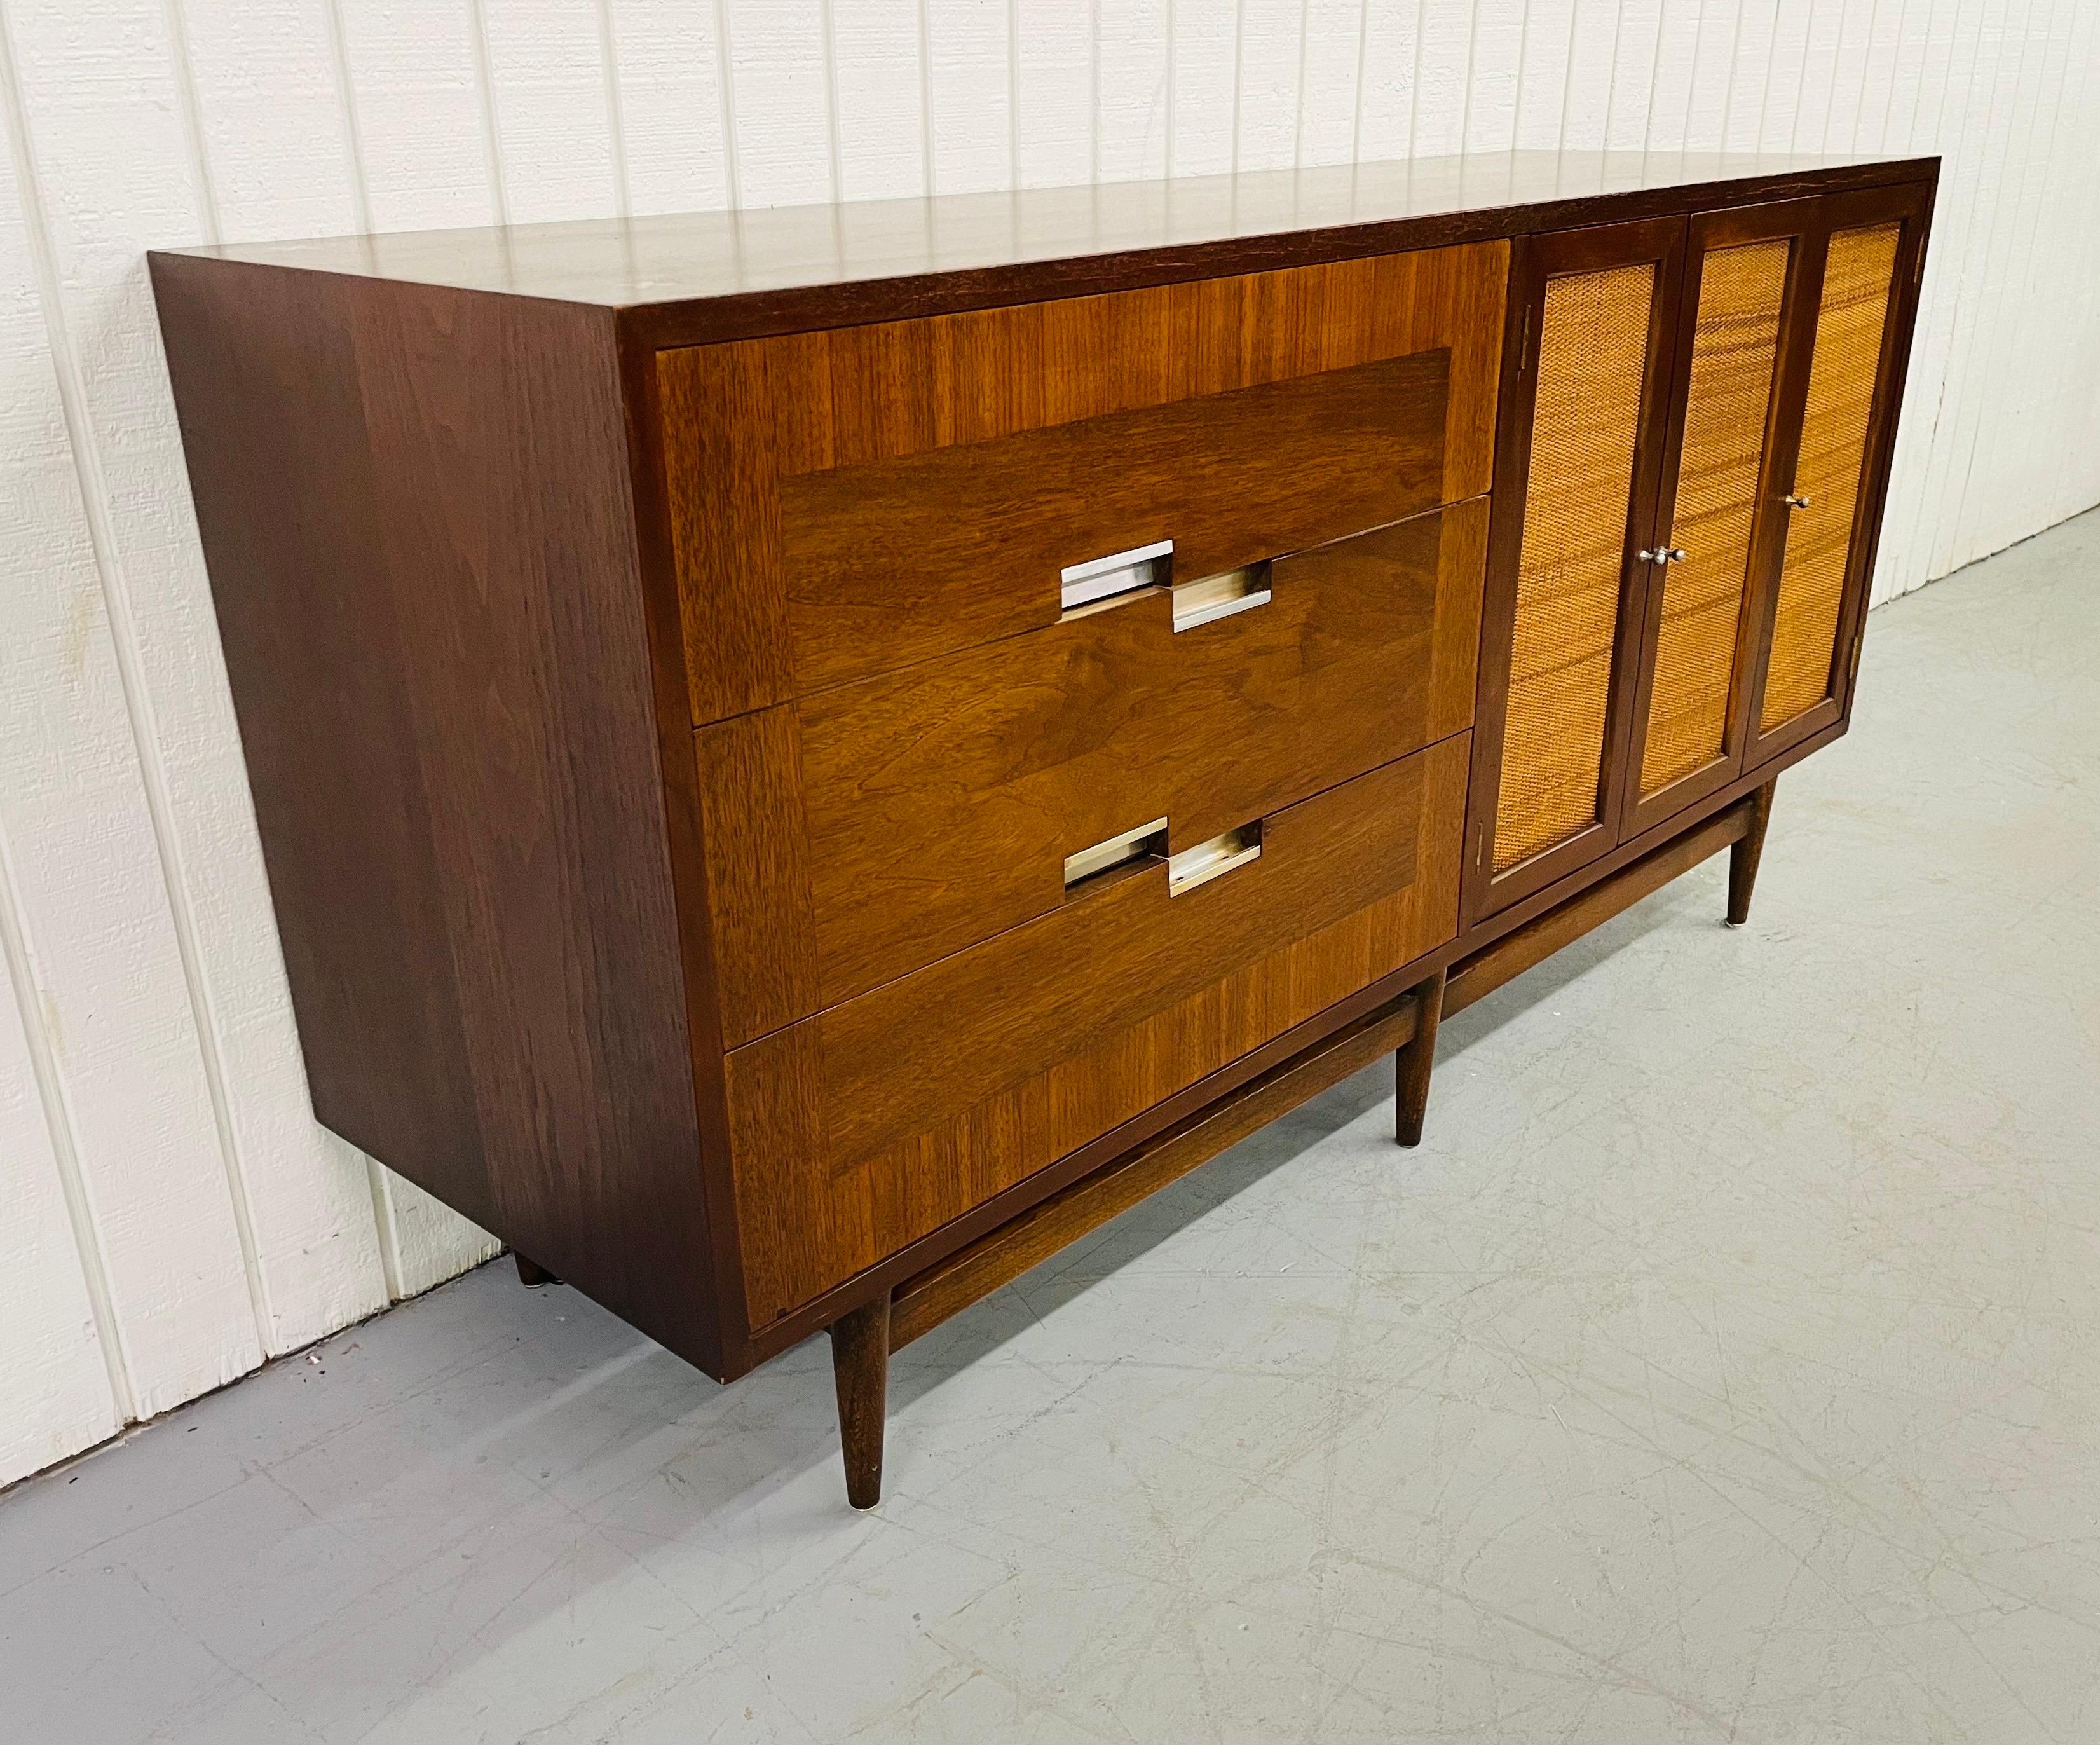 This listing is for a Mid-Century American of Martinsville walnut dresser. Featuring six drawers for storage, cane front doors, and a beautiful inlaid walnut top.